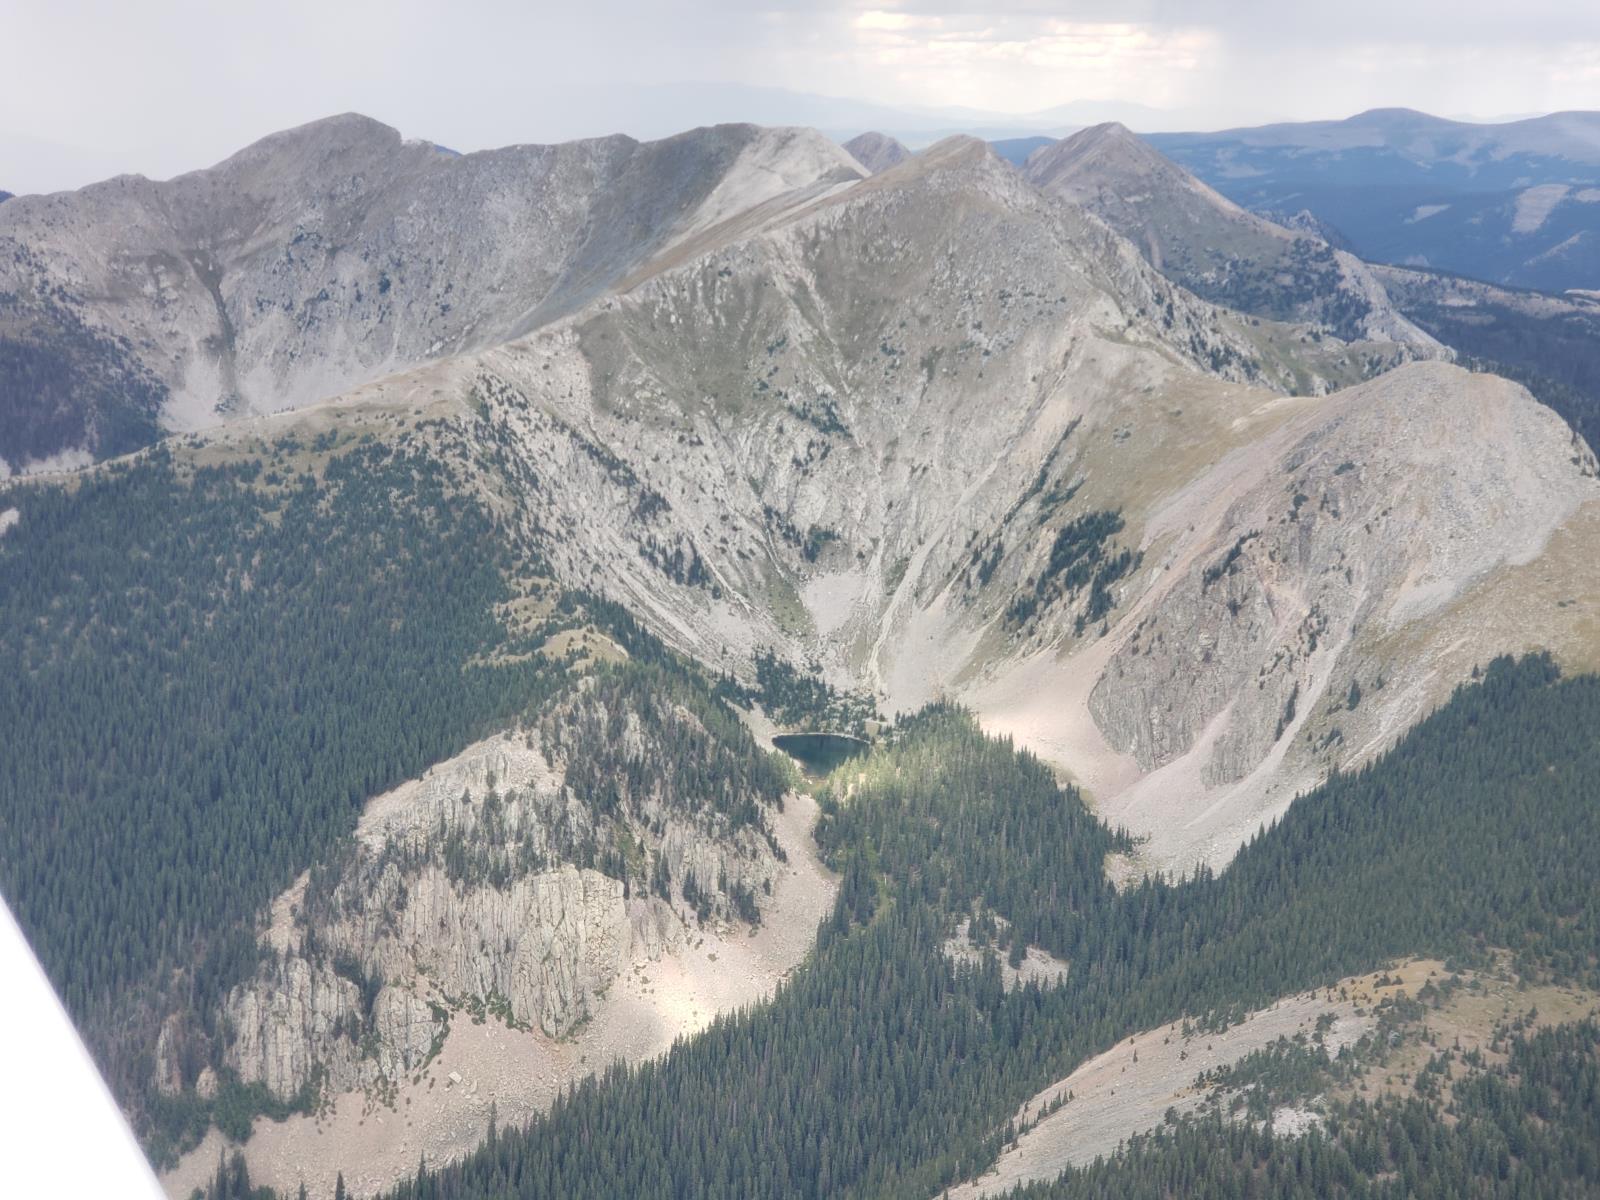 Flying over Rocky Mountain National Park in Colorado